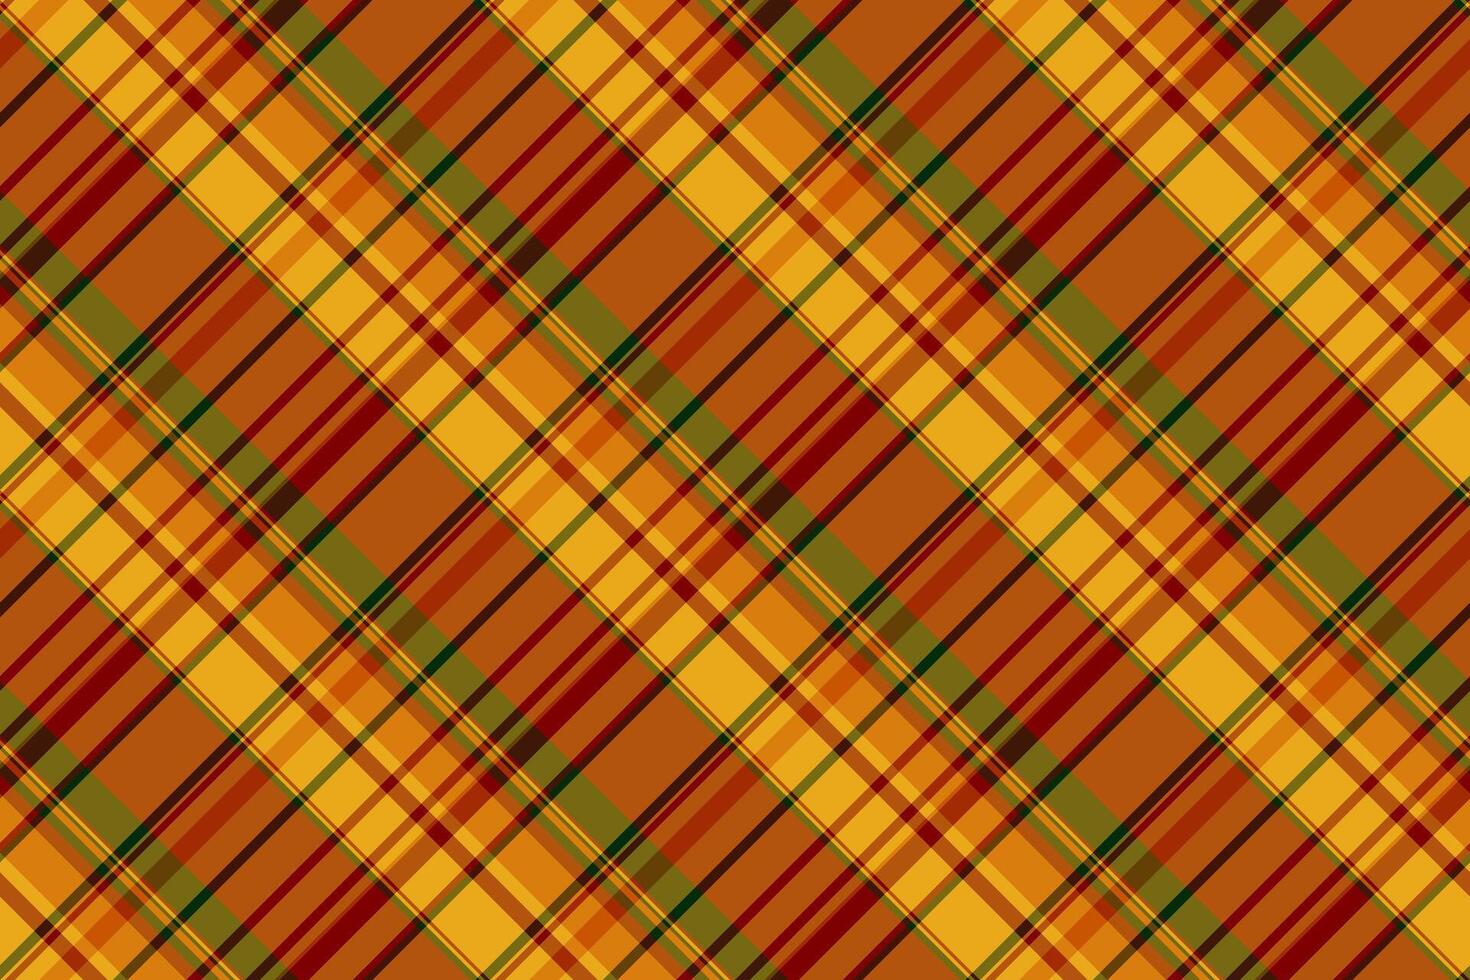 Japanese textile tartan background, woman check texture seamless. 60s plaid fabric pattern vector in orange and amber colors.